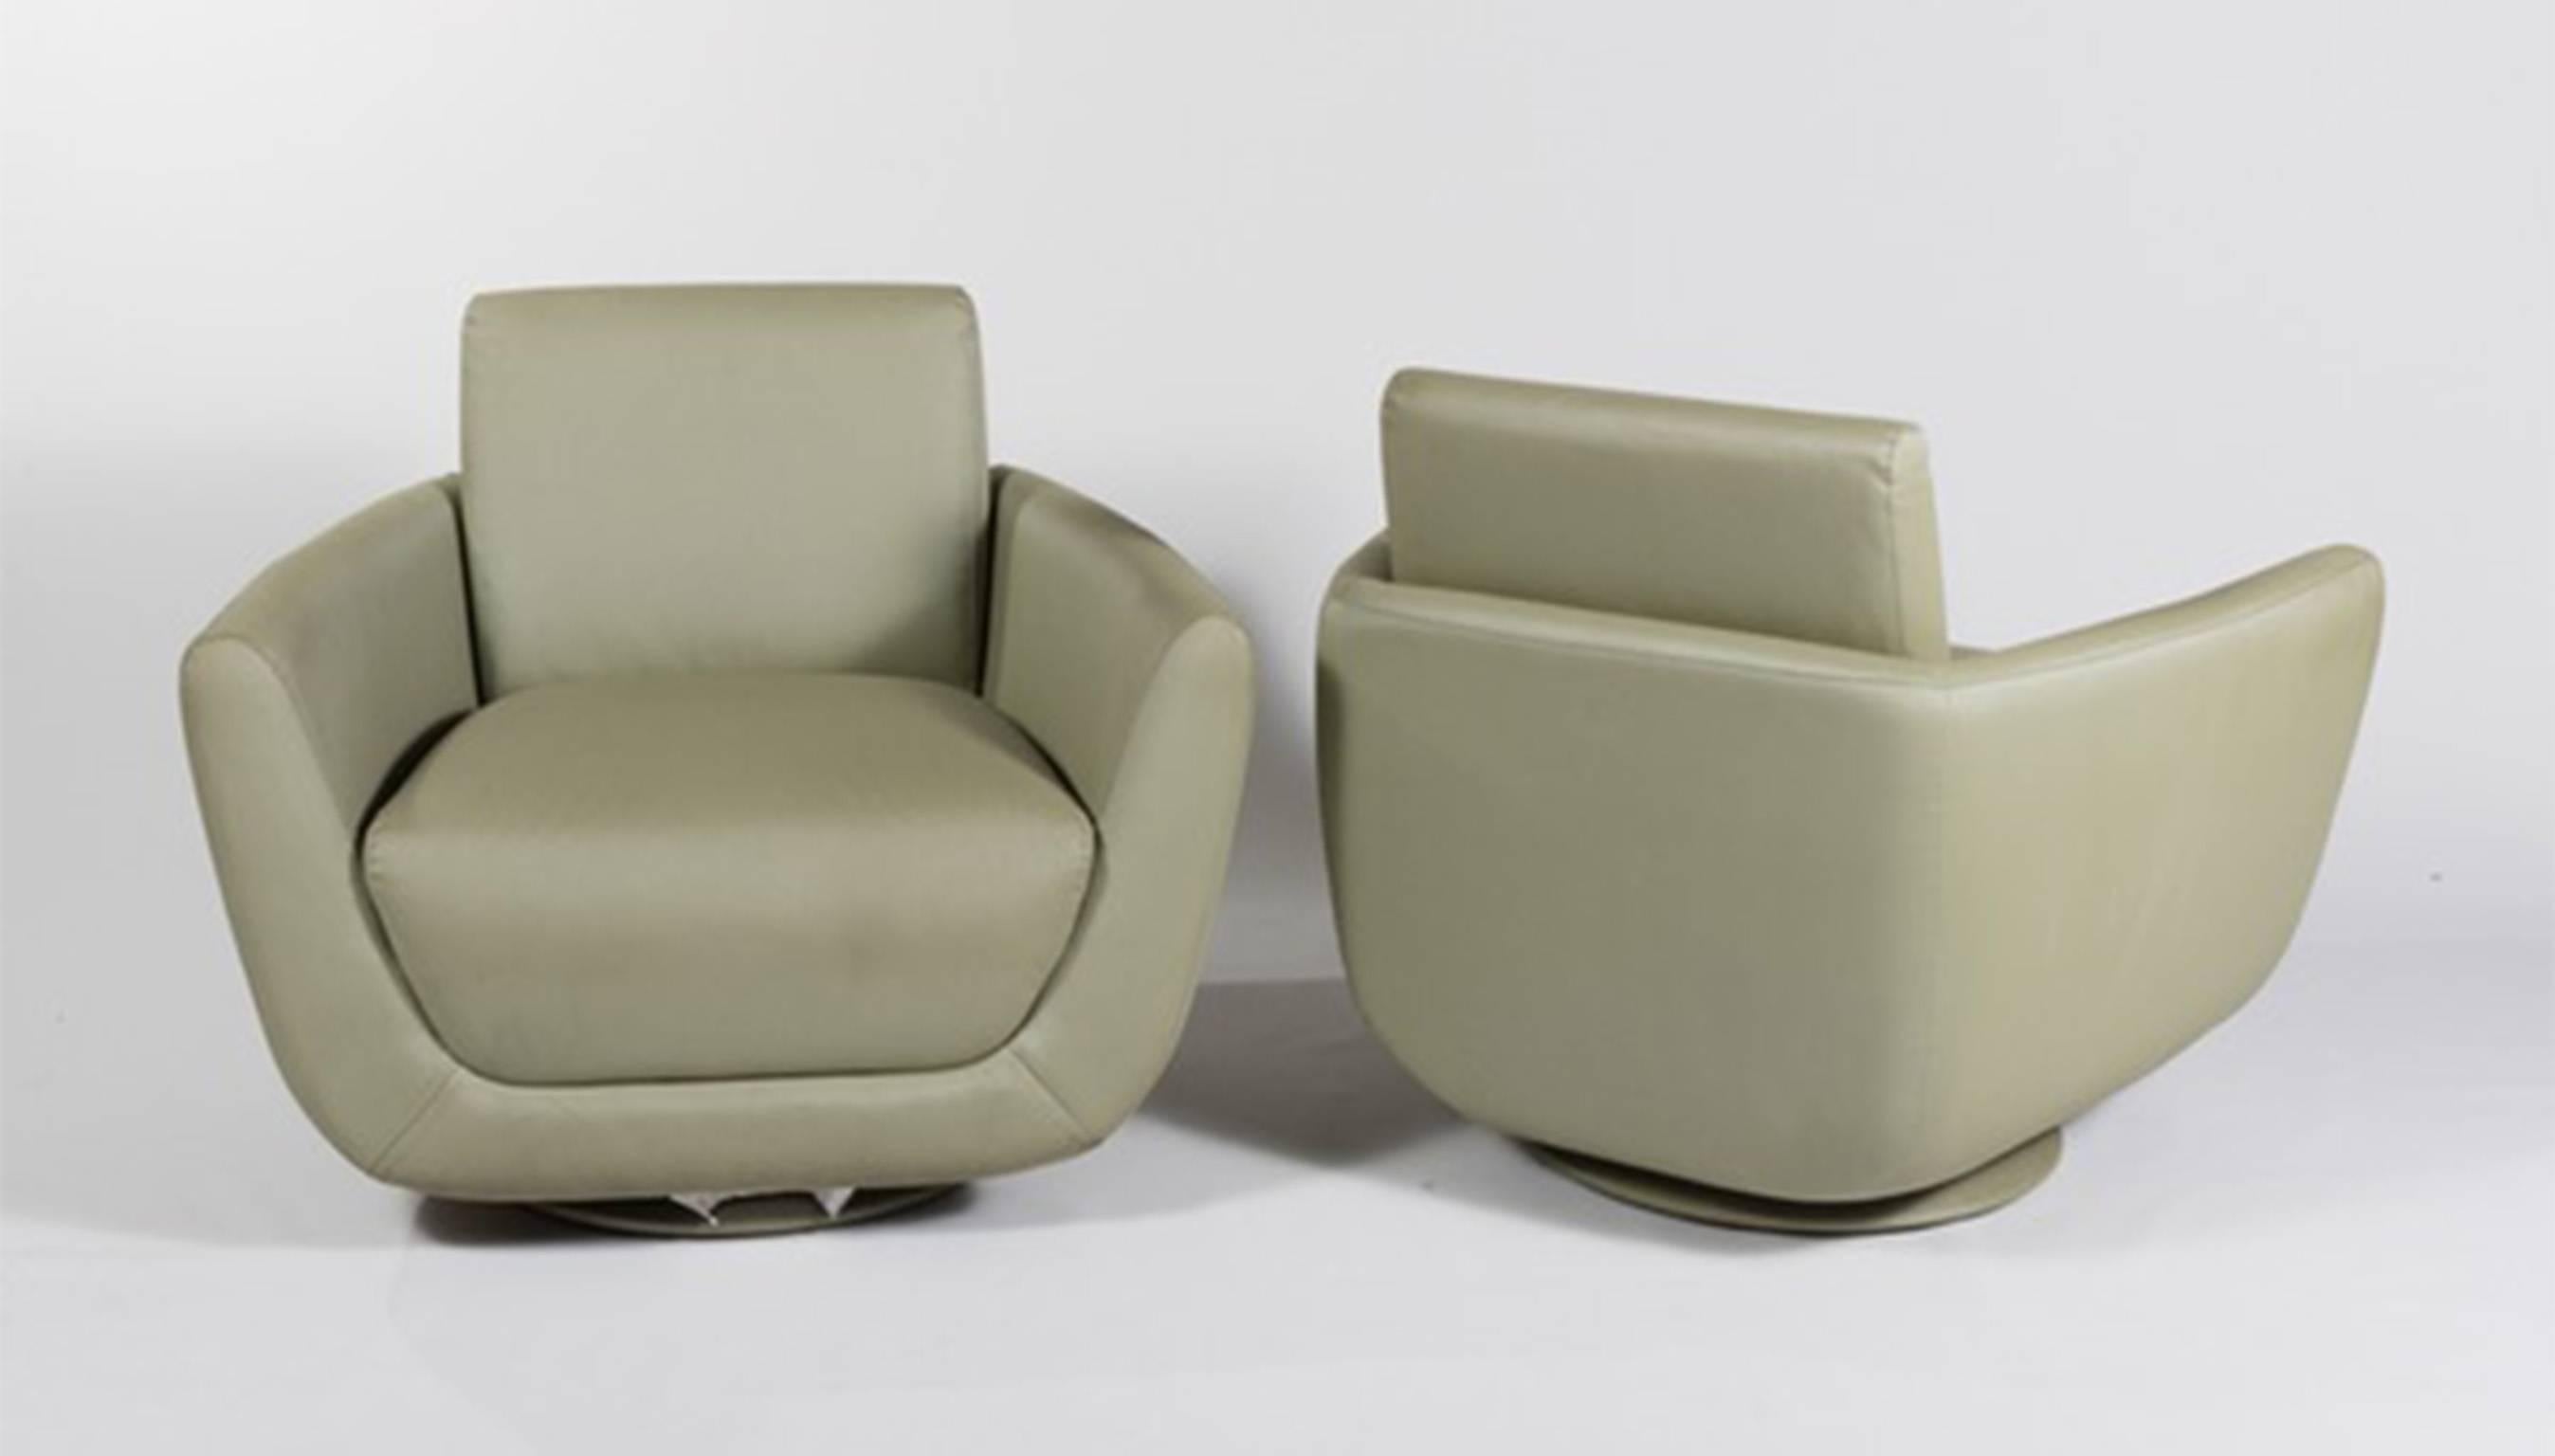 A pair of Mid-Century Modern swivel armchairs. The chairs feature a green leather-like upholstery, a removable seat cushion and a circular swivel base.